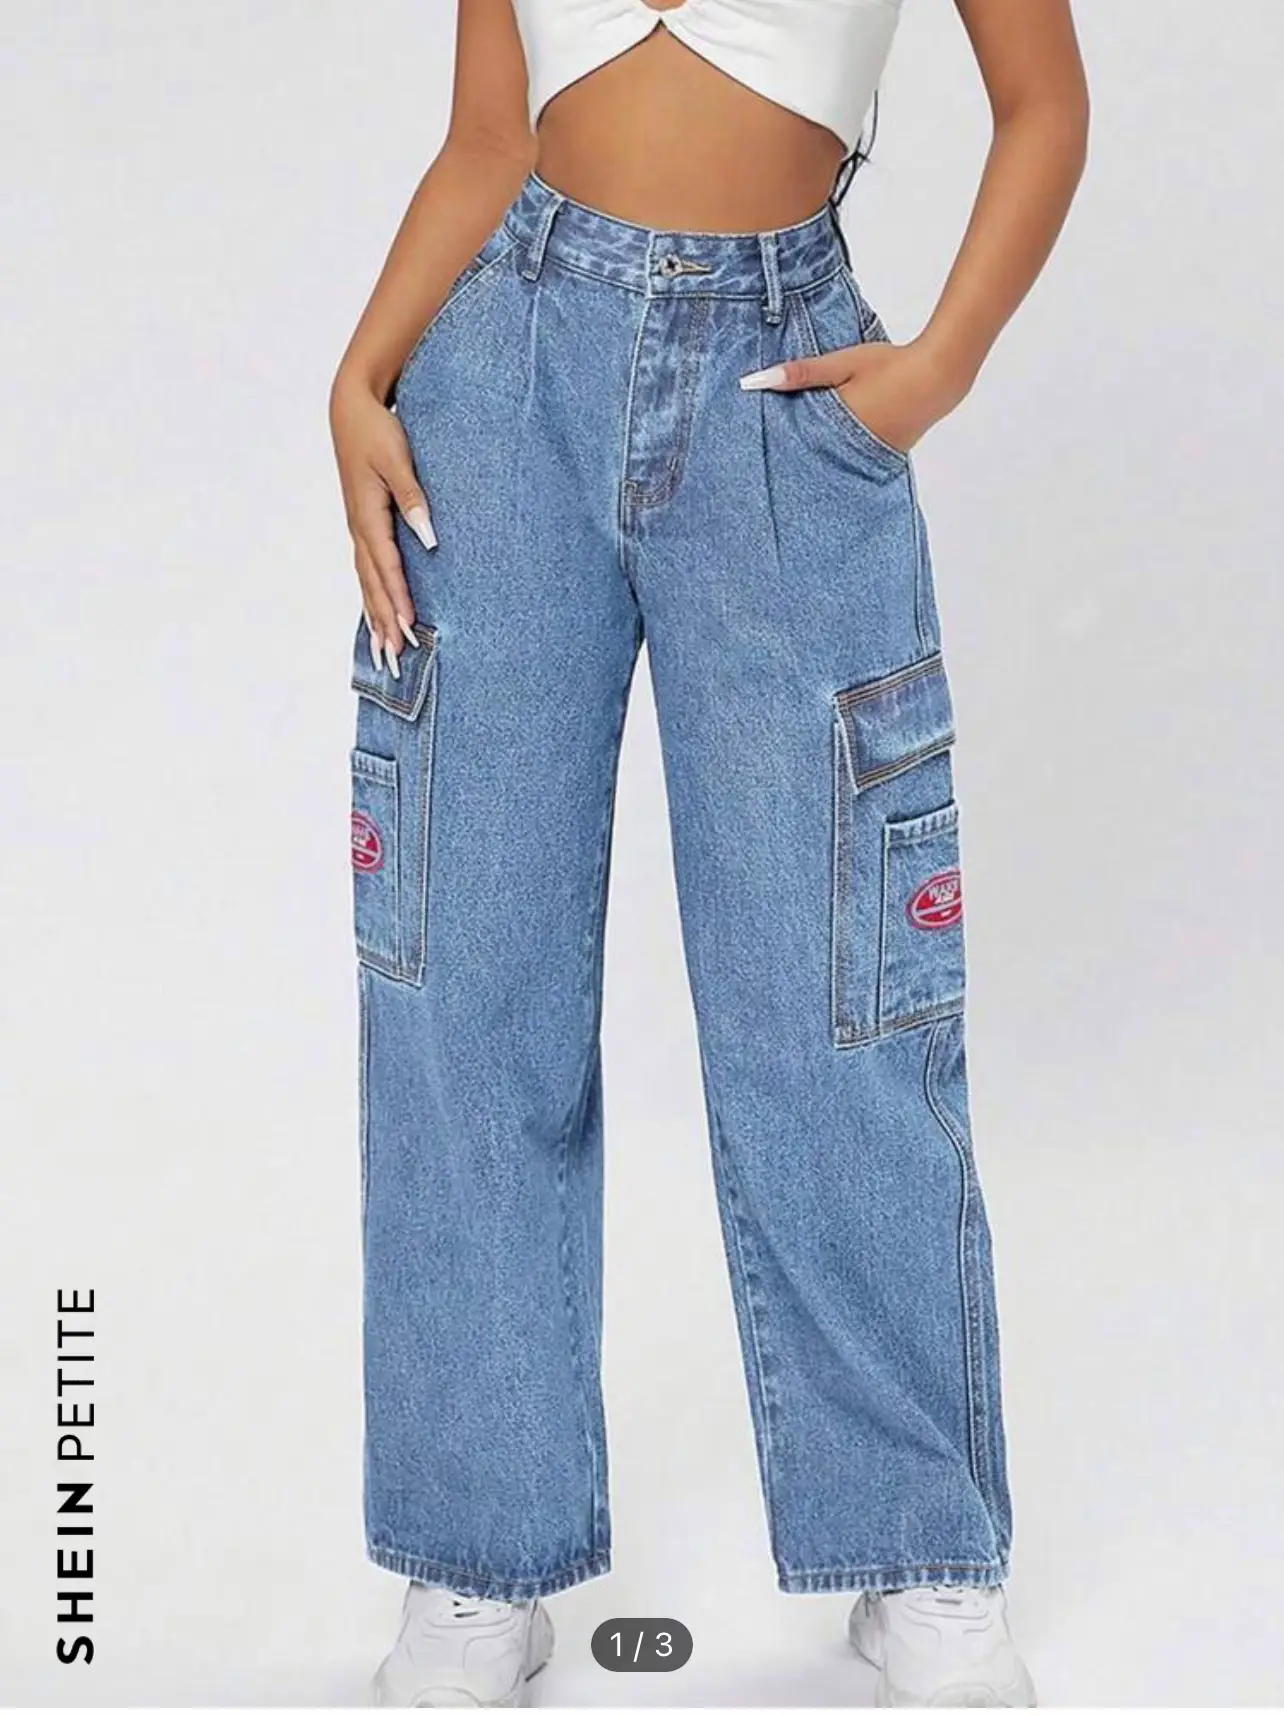 High Waisted Flap Pocket Side Baggy Jeans  Casual denim pants, Cargo pants  outfit, Shein outfits